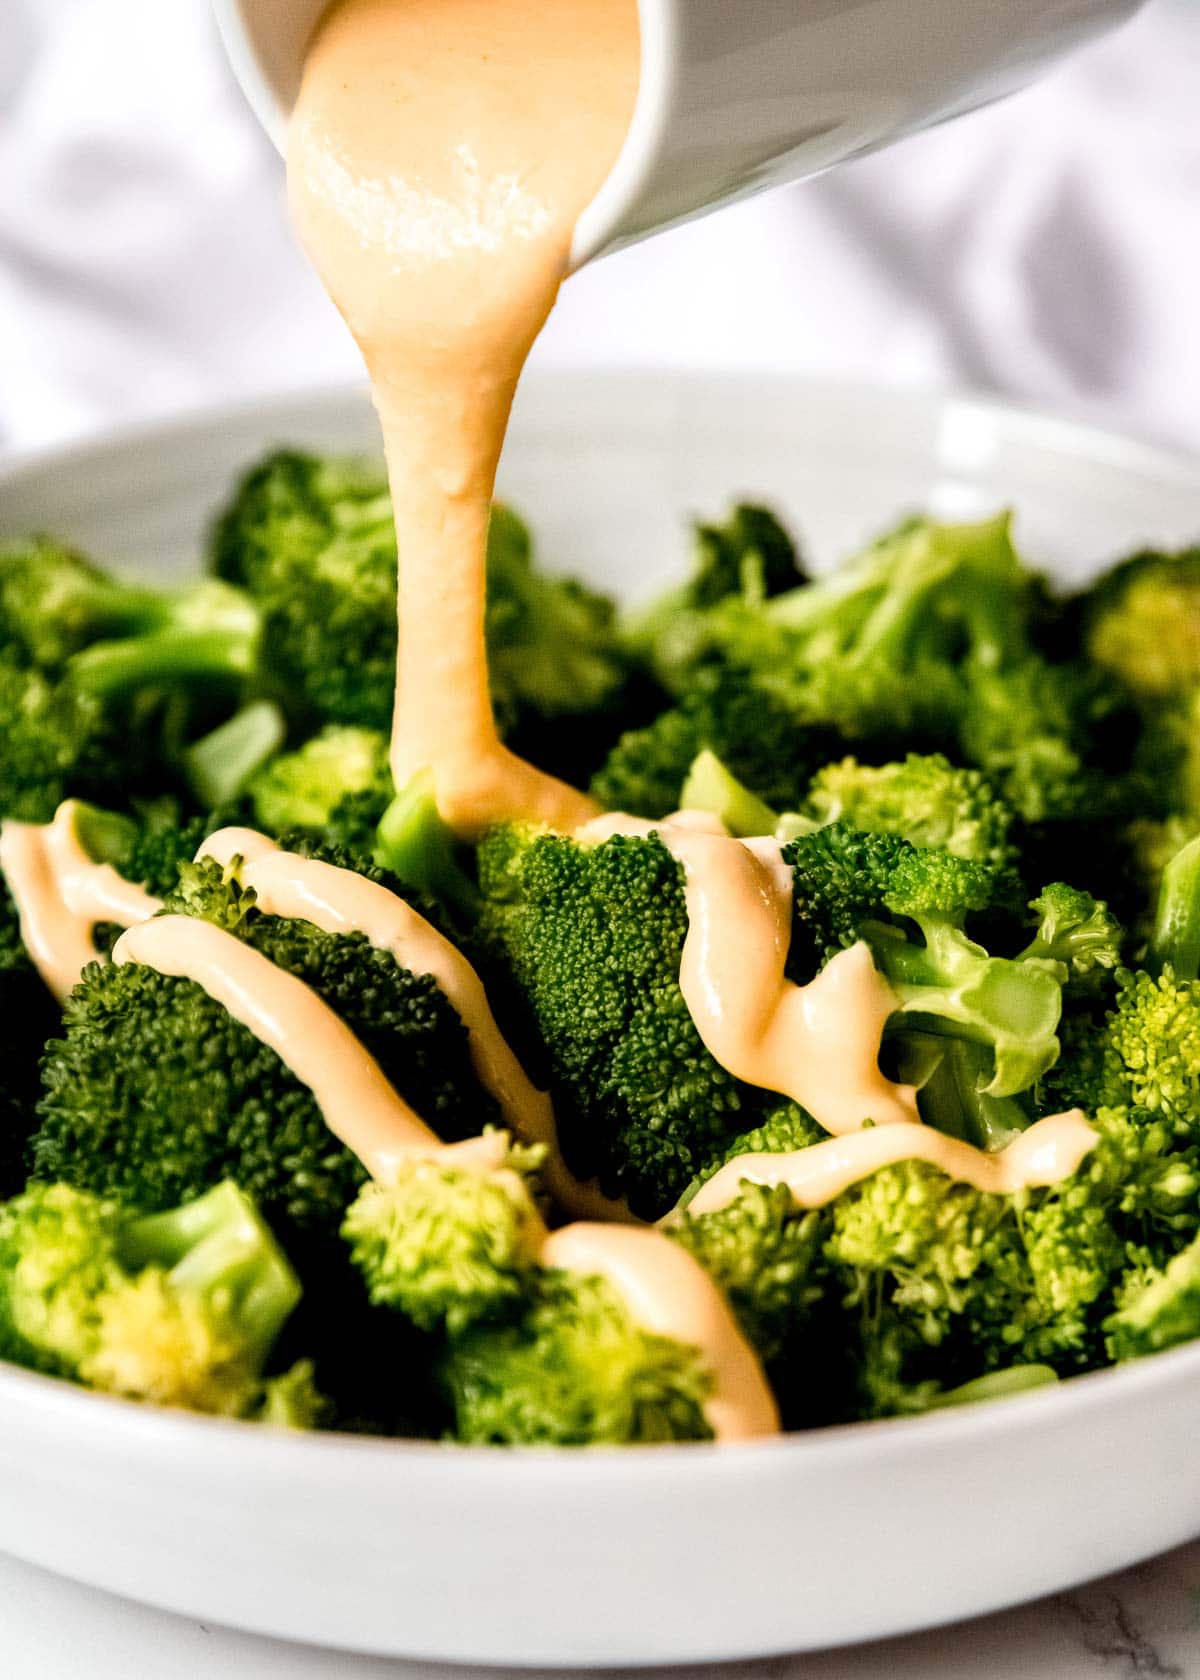 cheese sauce being poured on steamed broccoli